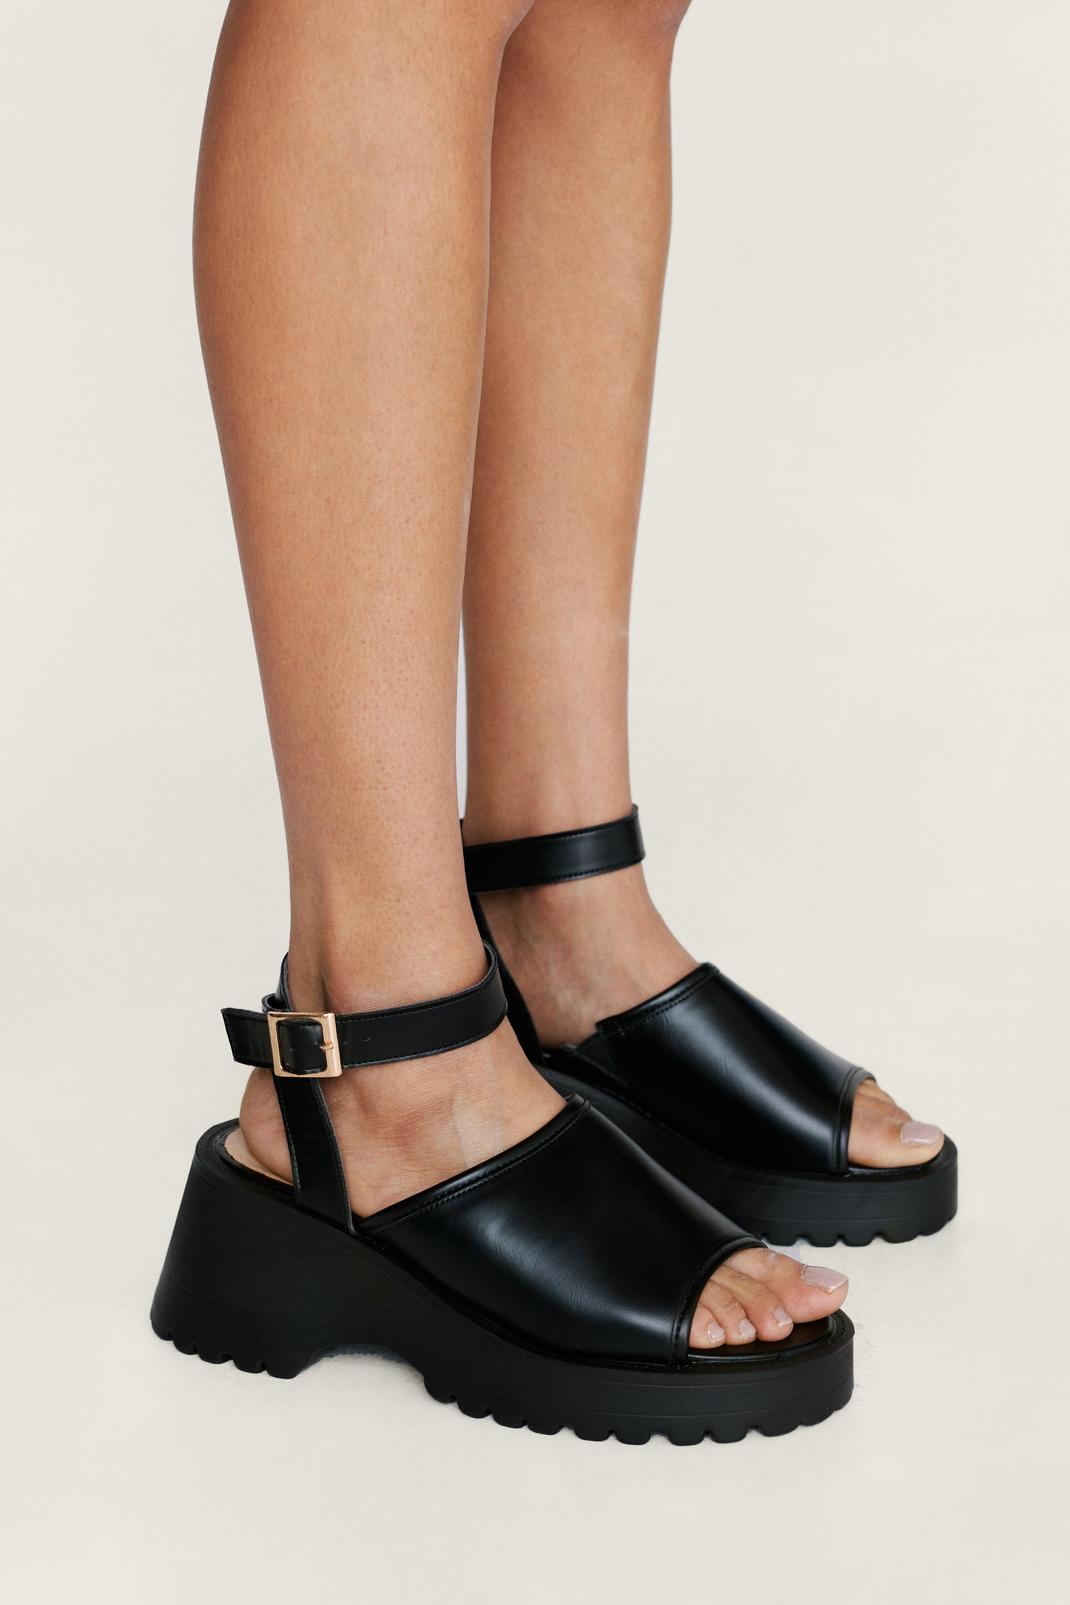 Black Chunky Buckle Cleated Sole Open Toe Sandals image number 1